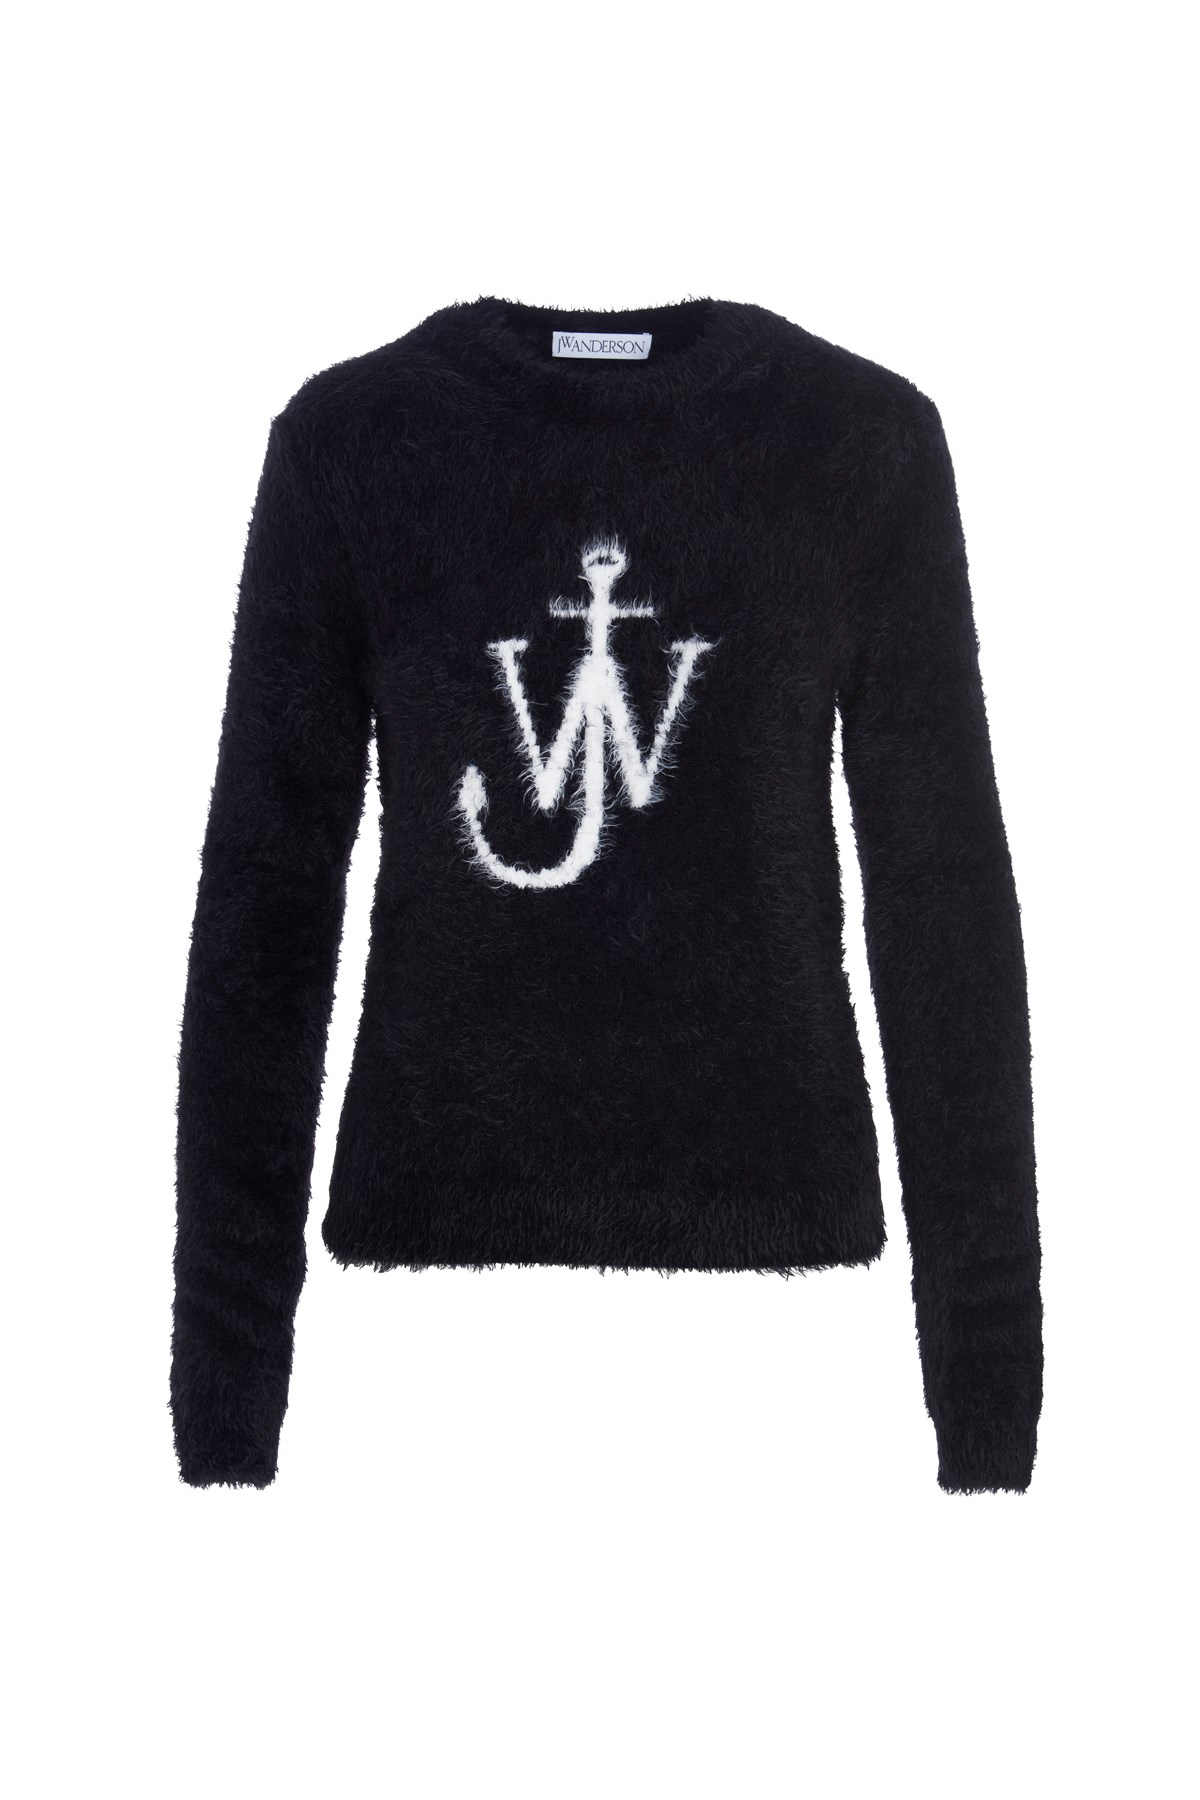 J.W.ANDERSON 'Anchor’ Sweater